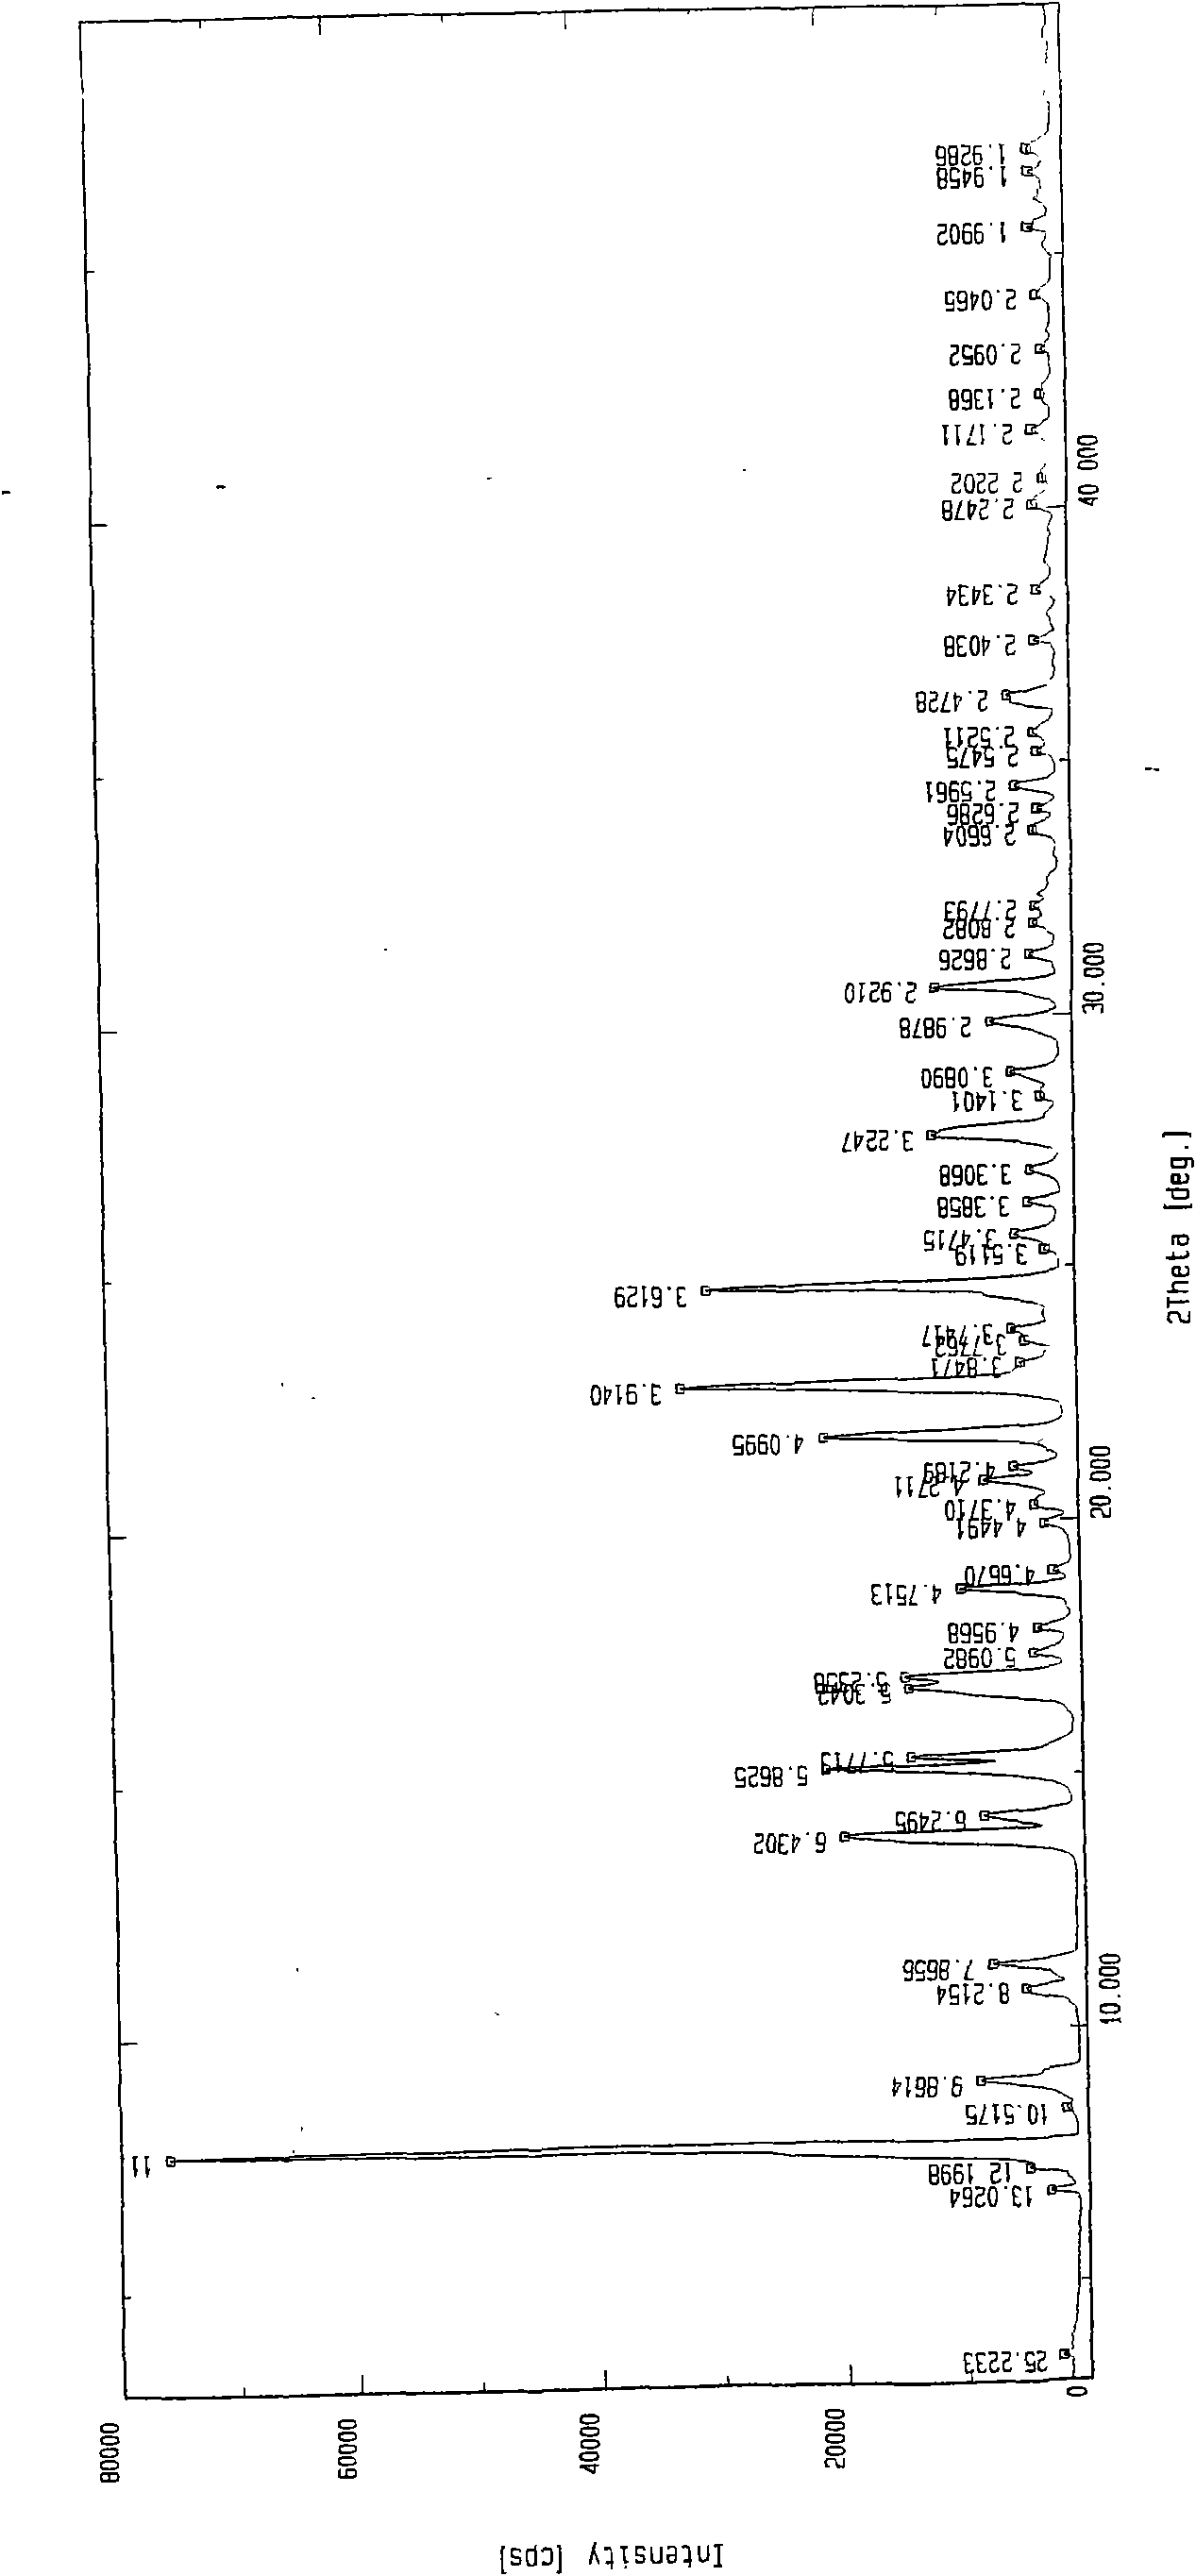 Citric acid aildenafil crystal form A and preparation method and usage thereof